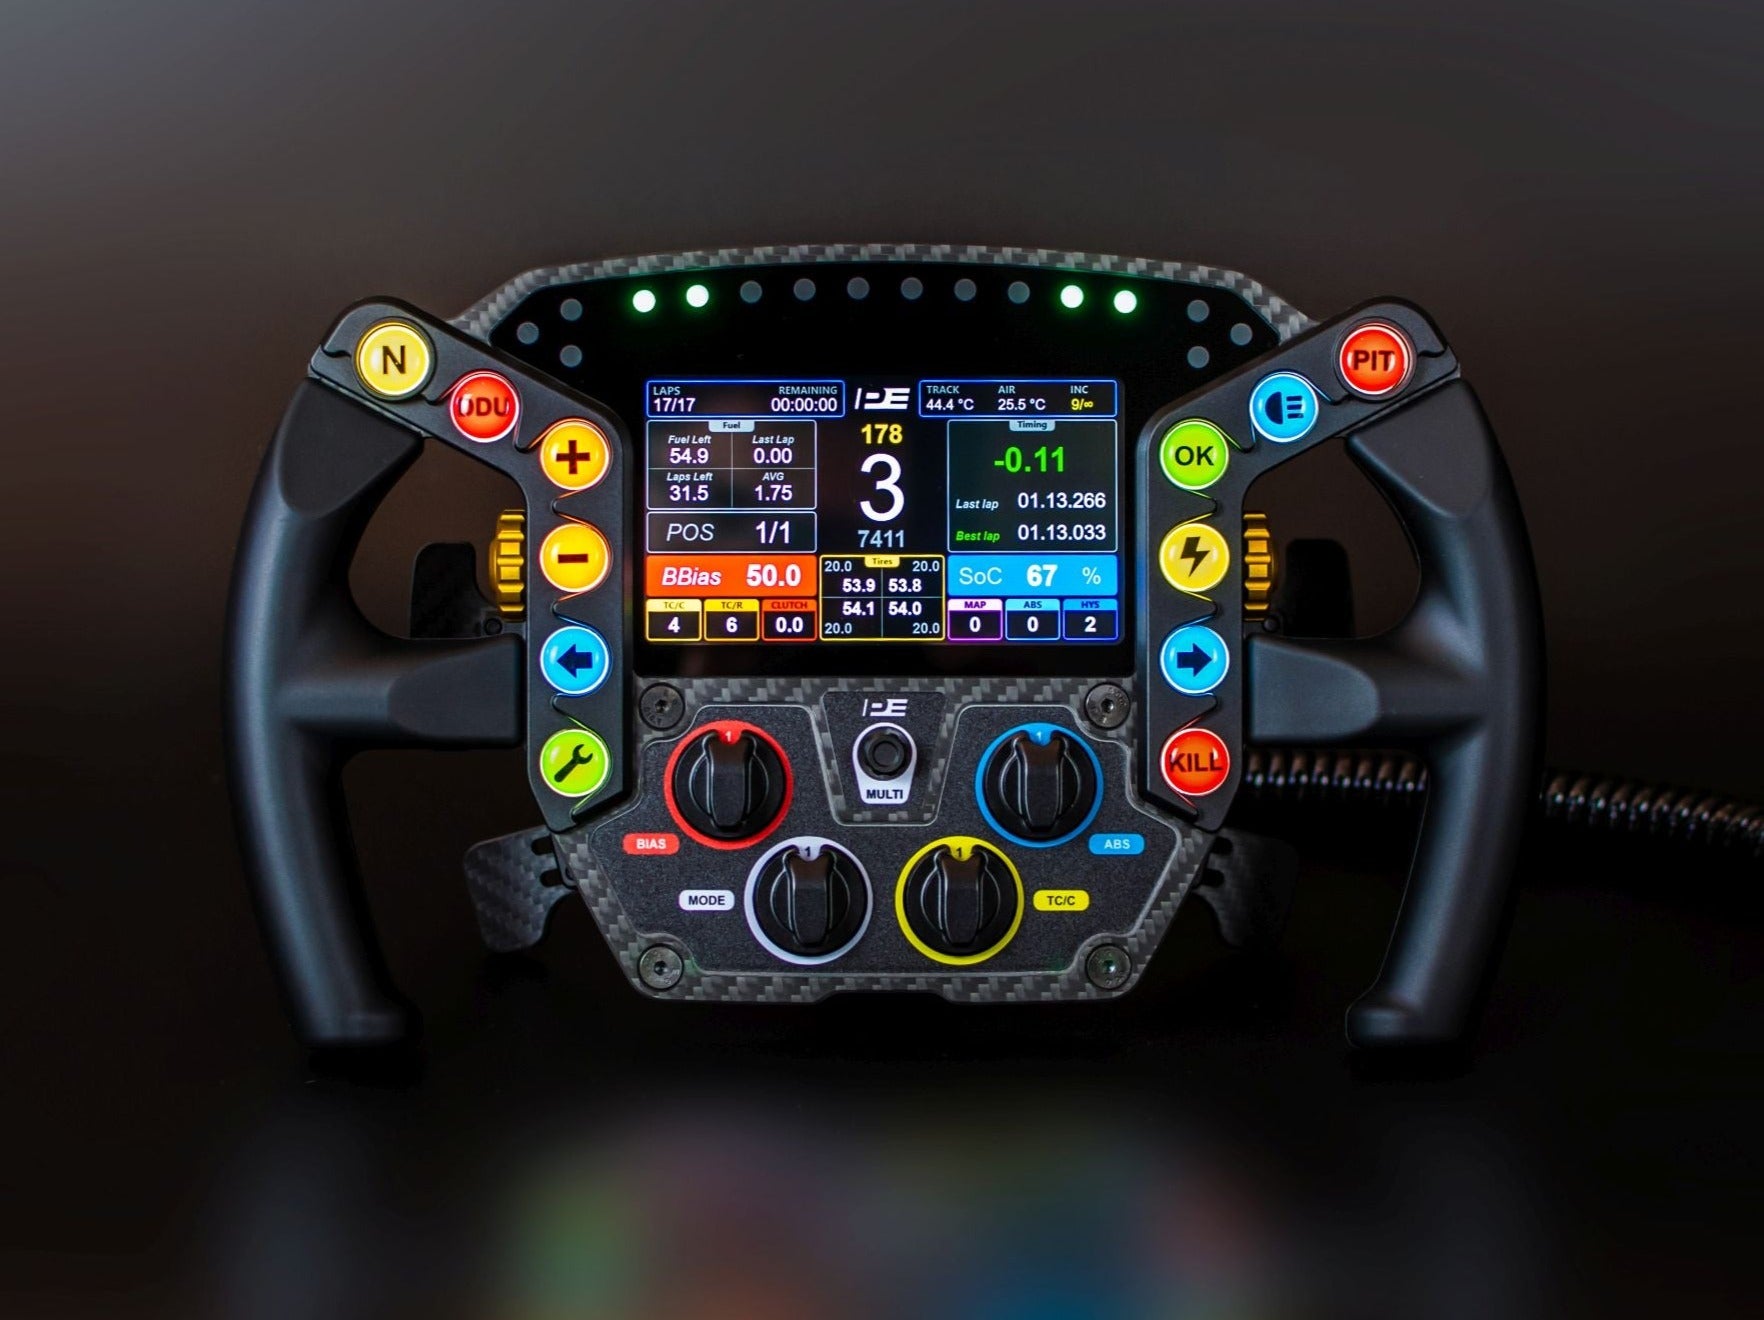 LMDH steering wheel replica front with display and backlight buttons